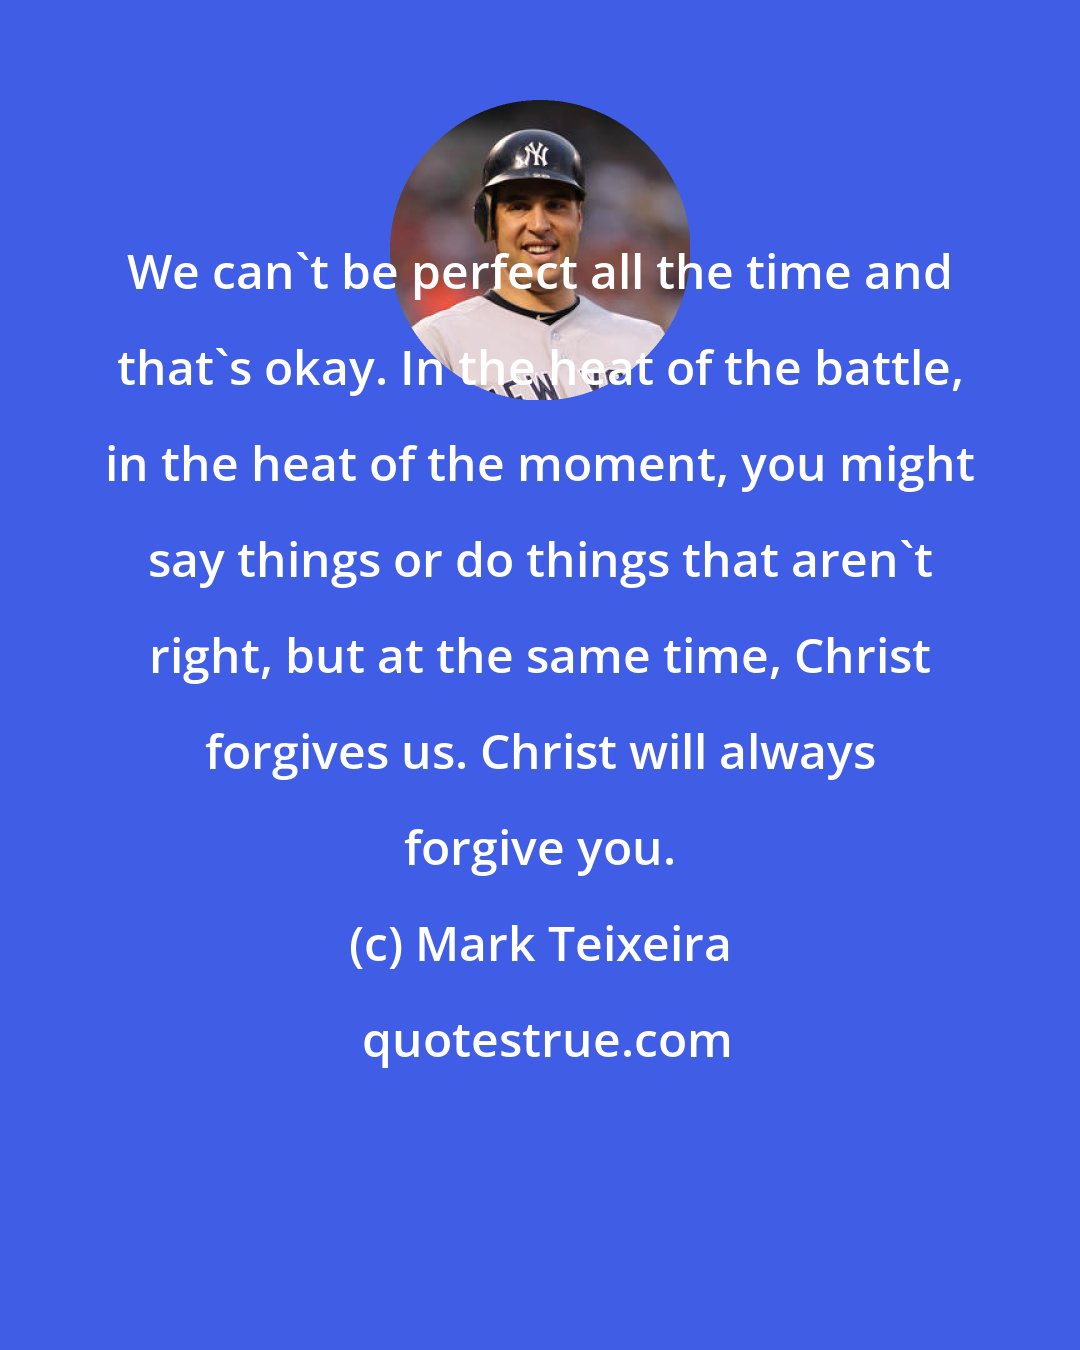 Mark Teixeira: We can't be perfect all the time and that's okay. In the heat of the battle, in the heat of the moment, you might say things or do things that aren't right, but at the same time, Christ forgives us. Christ will always forgive you.